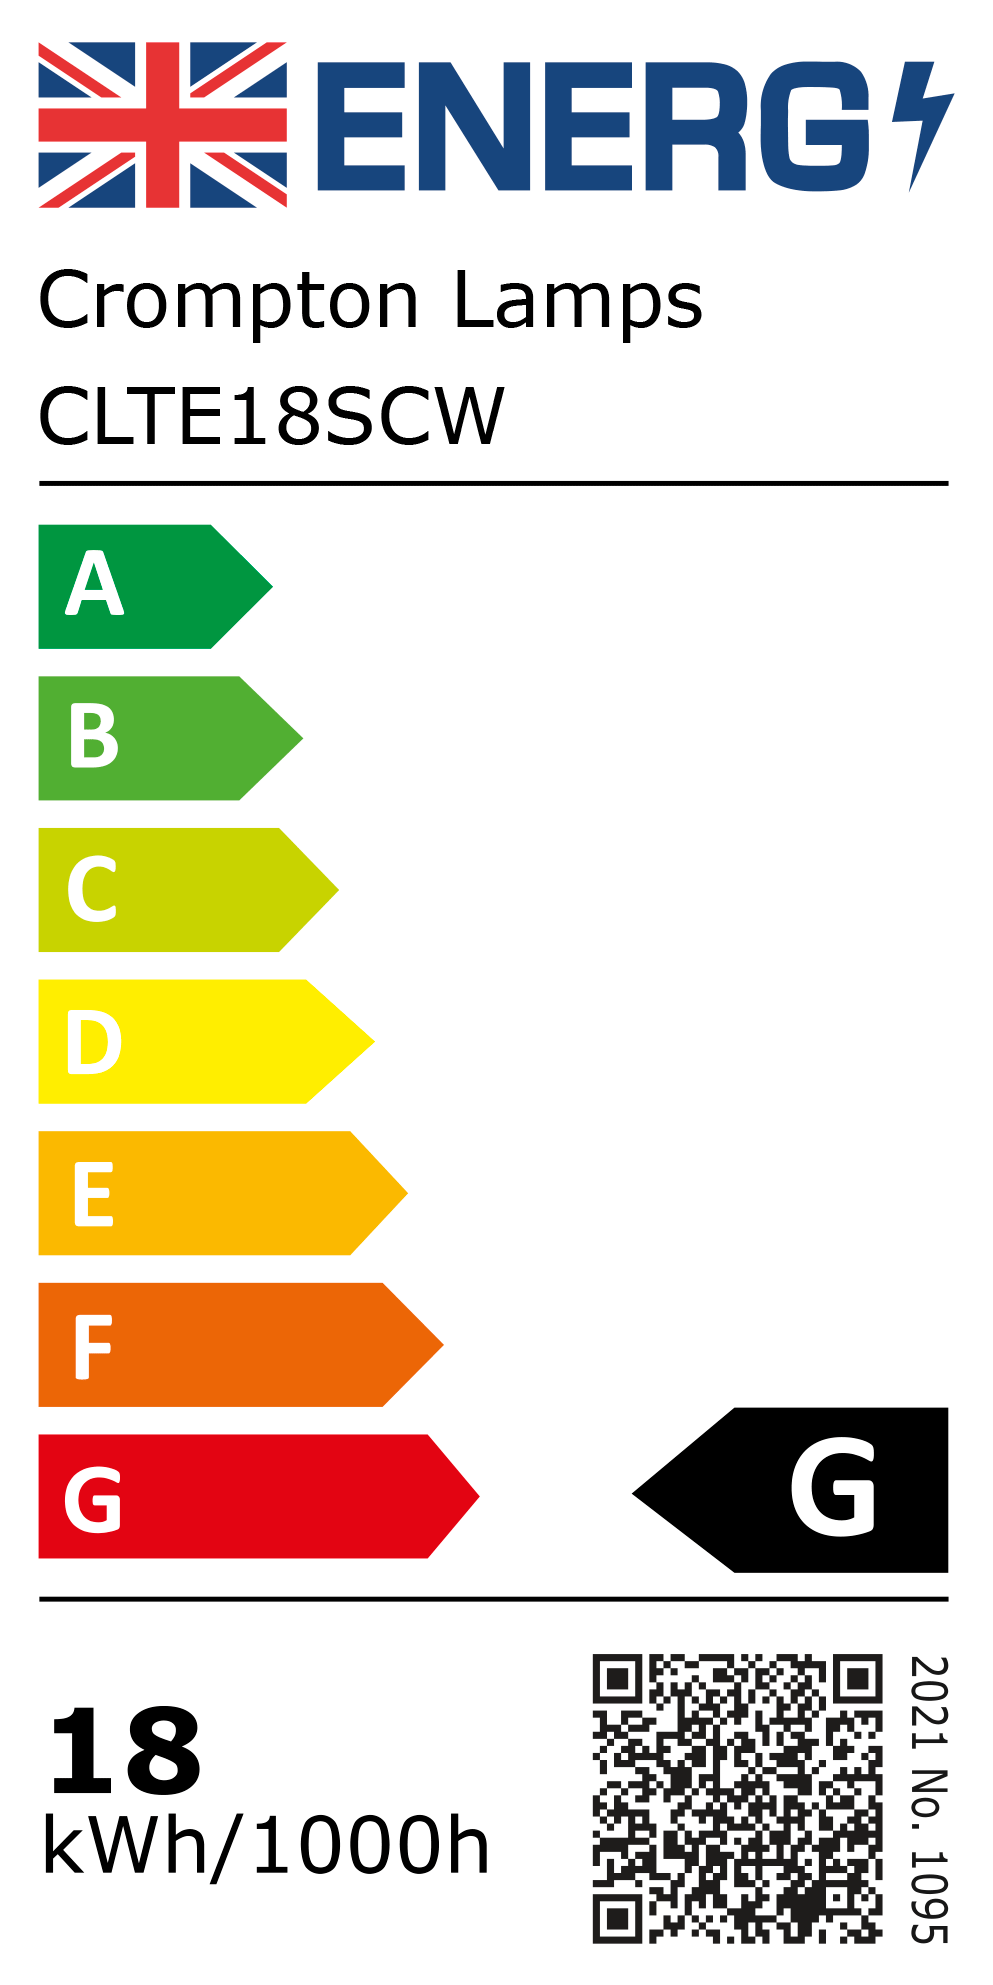 New 2021 Energy Rating Label: Stock Code CLTE18SCW